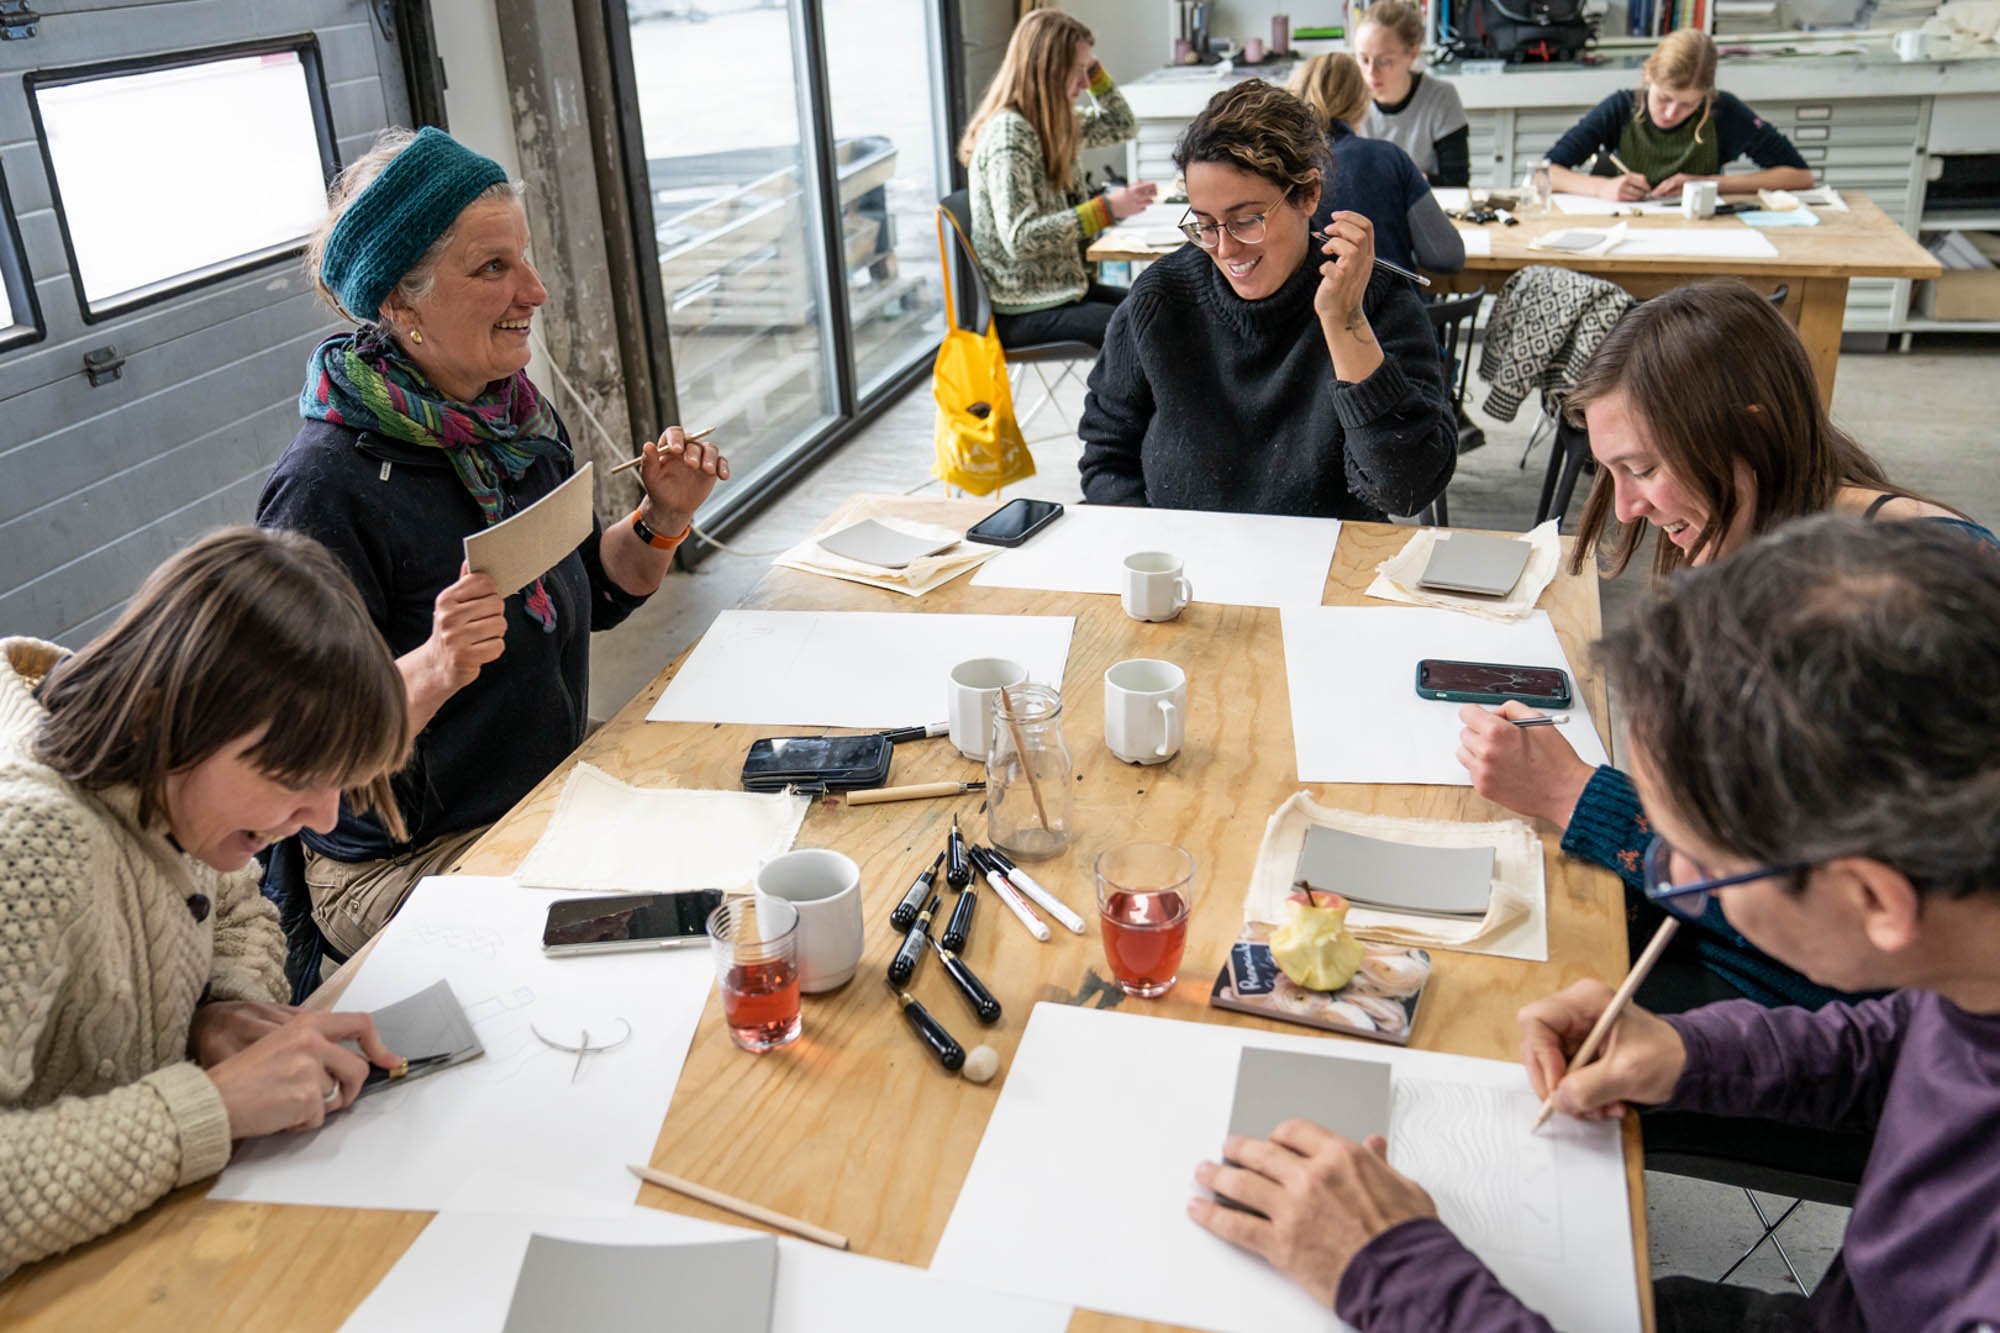  From a creative lino printing workshop by Ramona Salo Myrseth and Katarina Skår Lisa, during their residency in August 2021. Photo: Tom Warner 